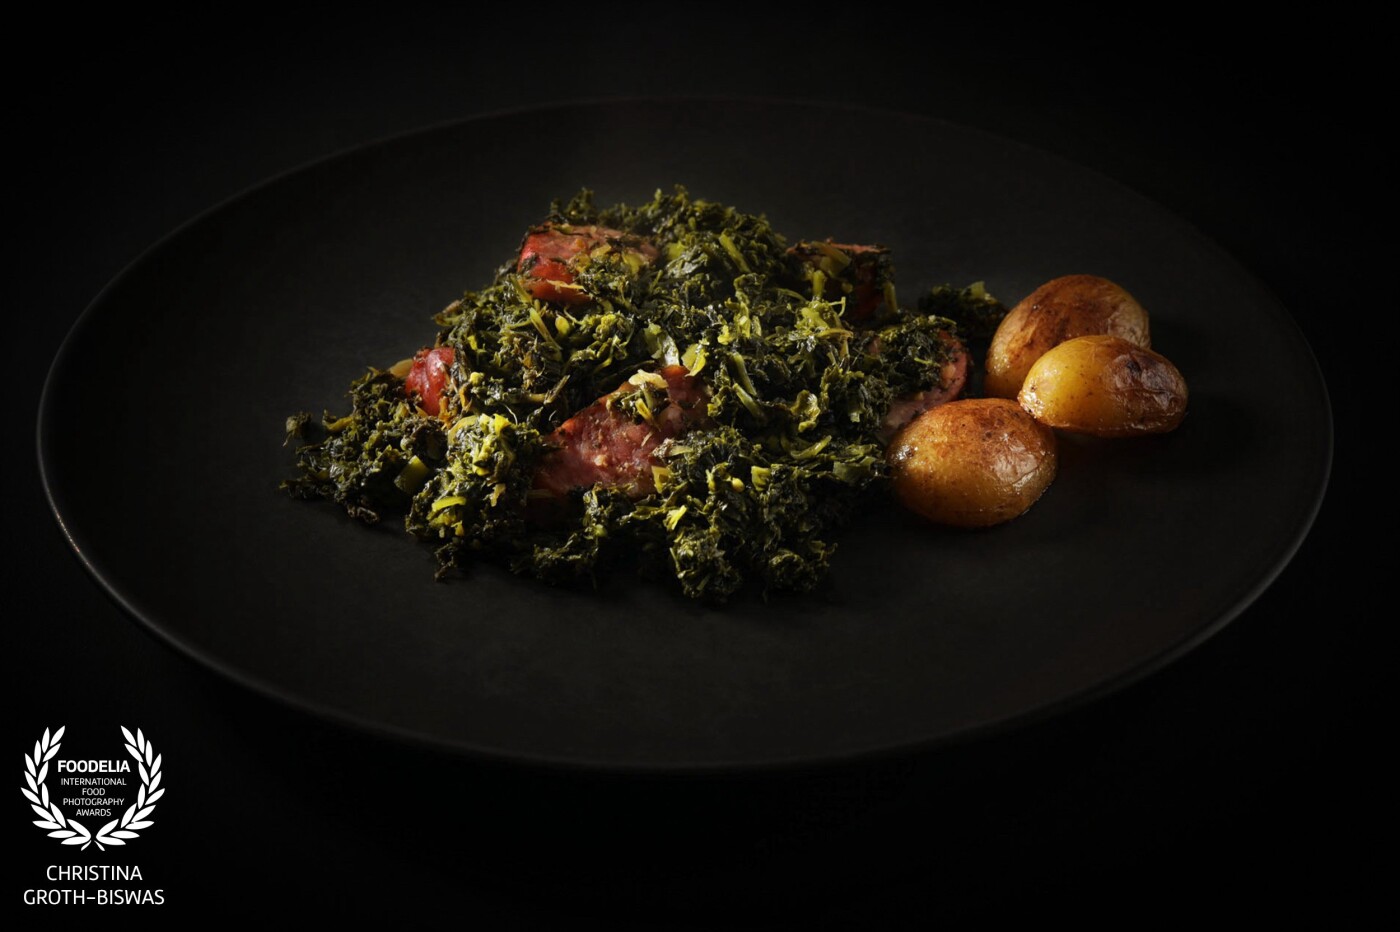 Grünkohl, or kale, is a very popular German winter warmer dish. It's usually a very rustic dish and often captured as such, but I wanted to show it differently to bring out its beautiful side.